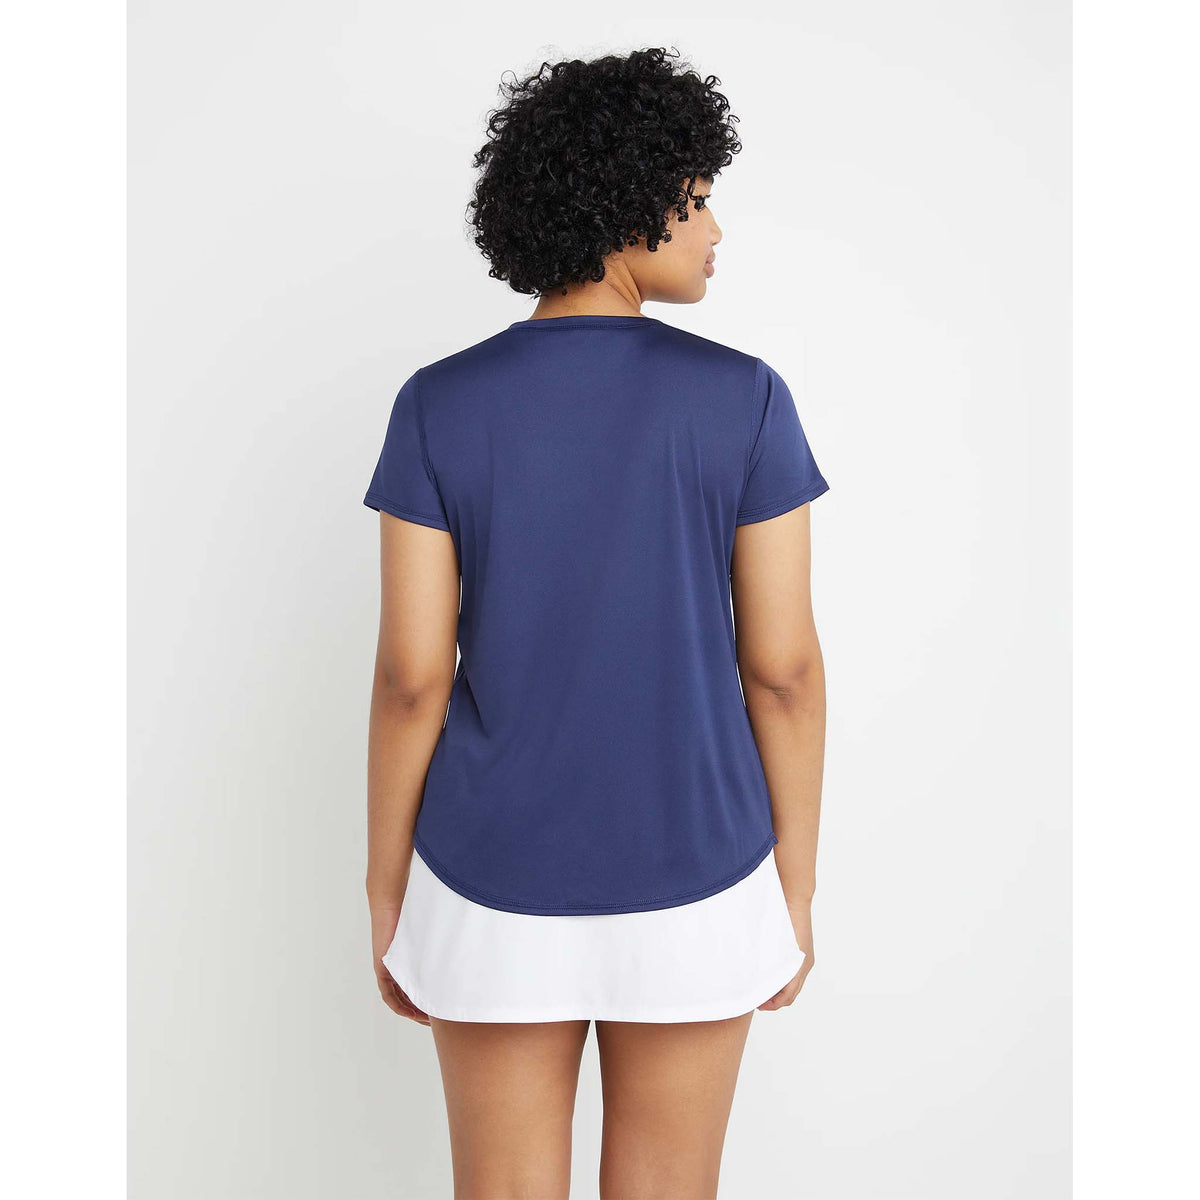 Champion Classic Sport T-shirt athletic navy femme dos